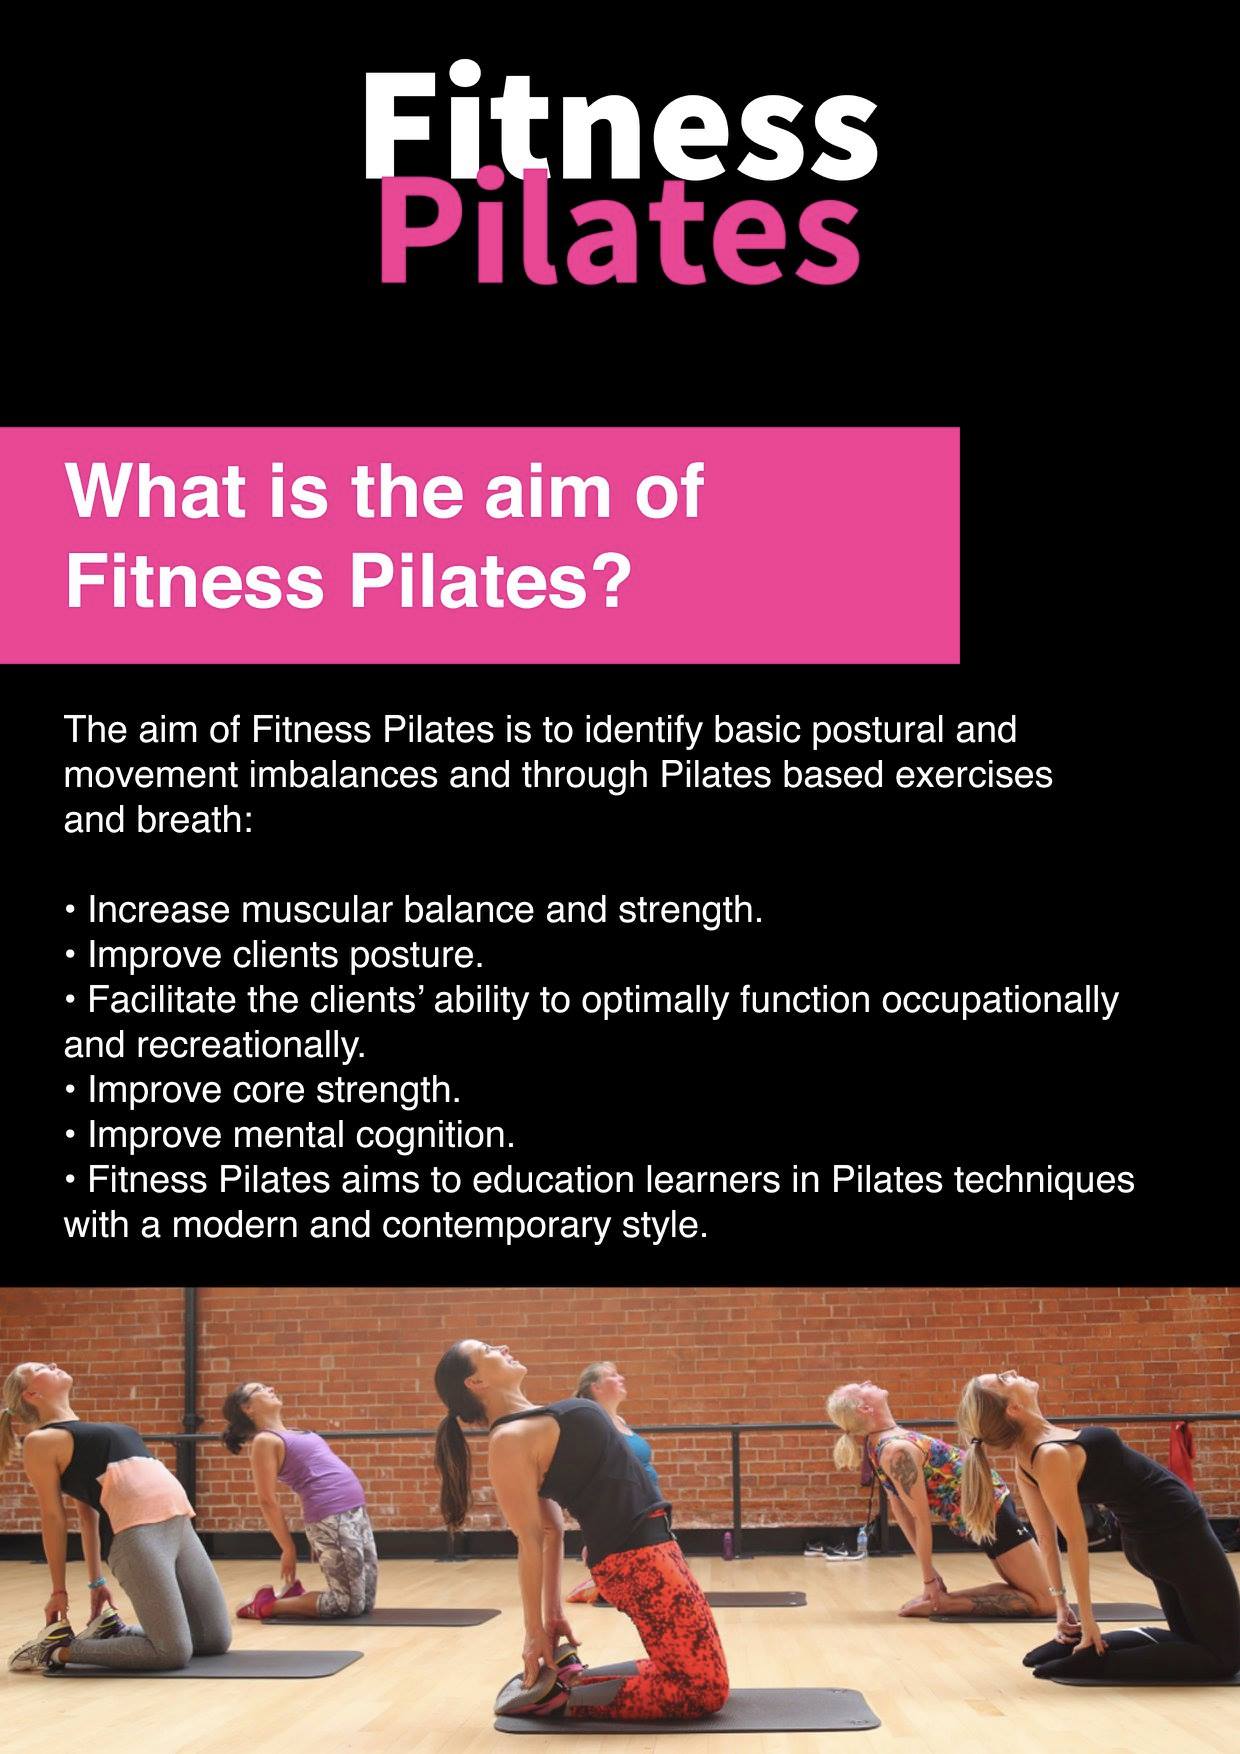 What is Fitness Pilates, and what is the aim of Fitness Pilates?